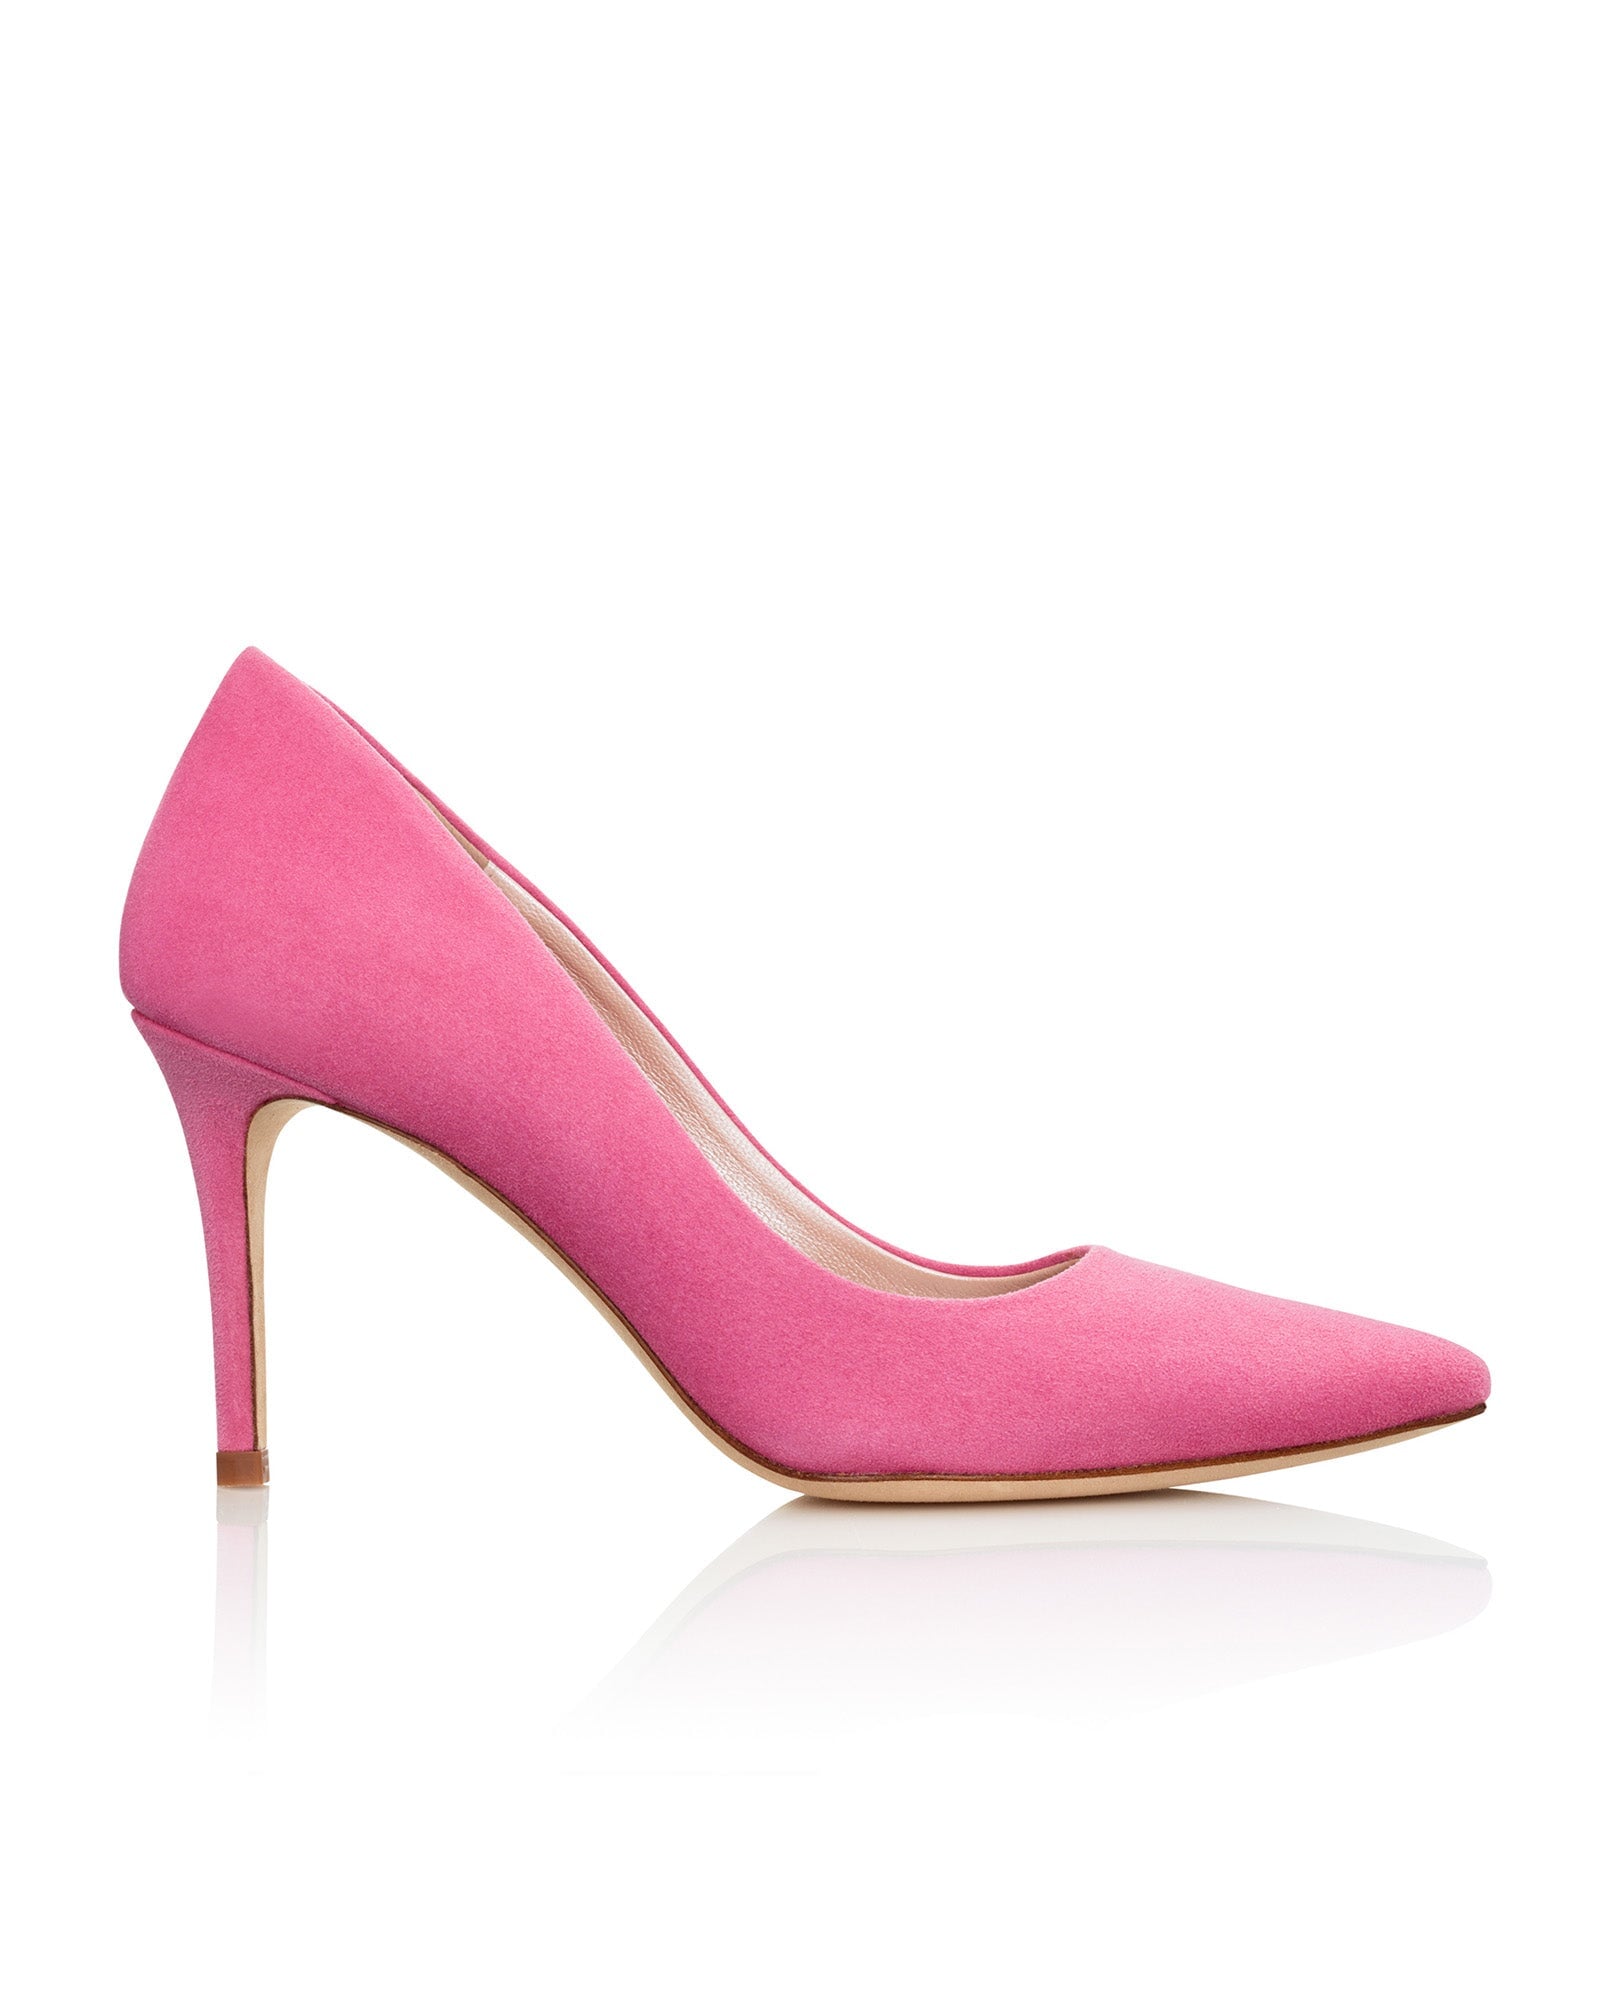 Women's Pink Shoes | Explore our New Arrivals | ZARA India